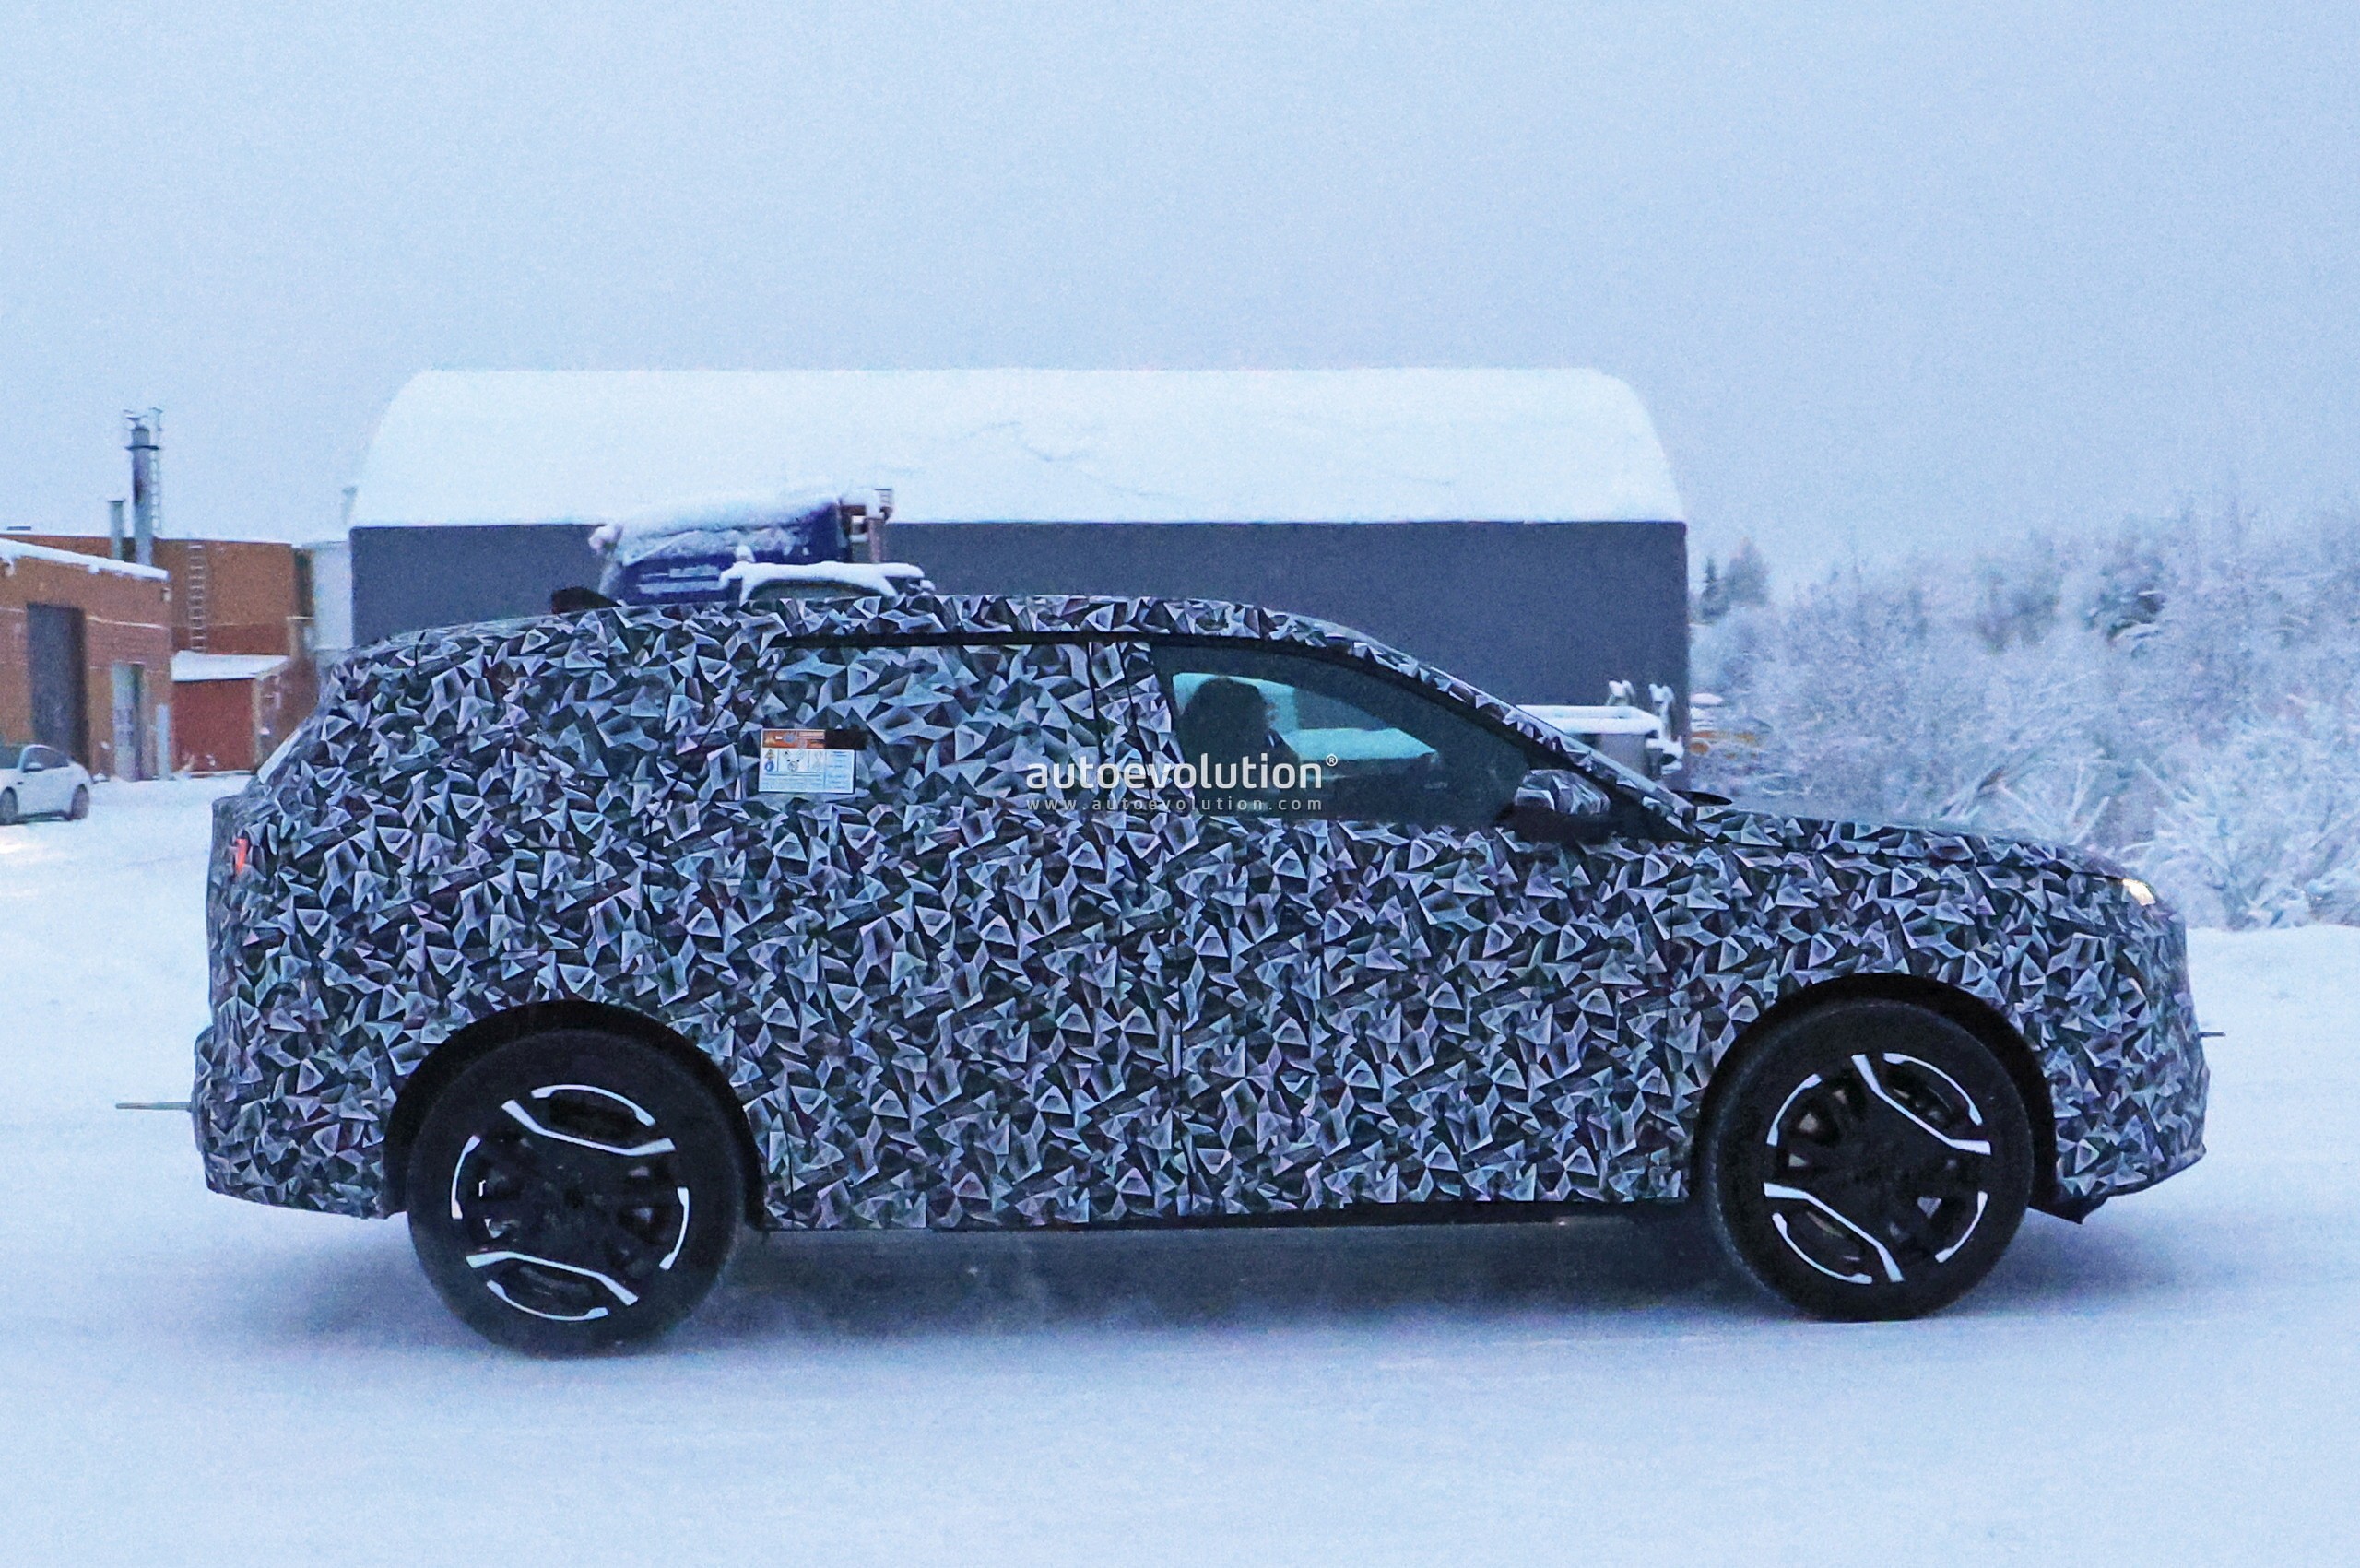 Next-Gen Peugeot 5008 Spied For The First Time With Boxy Shape